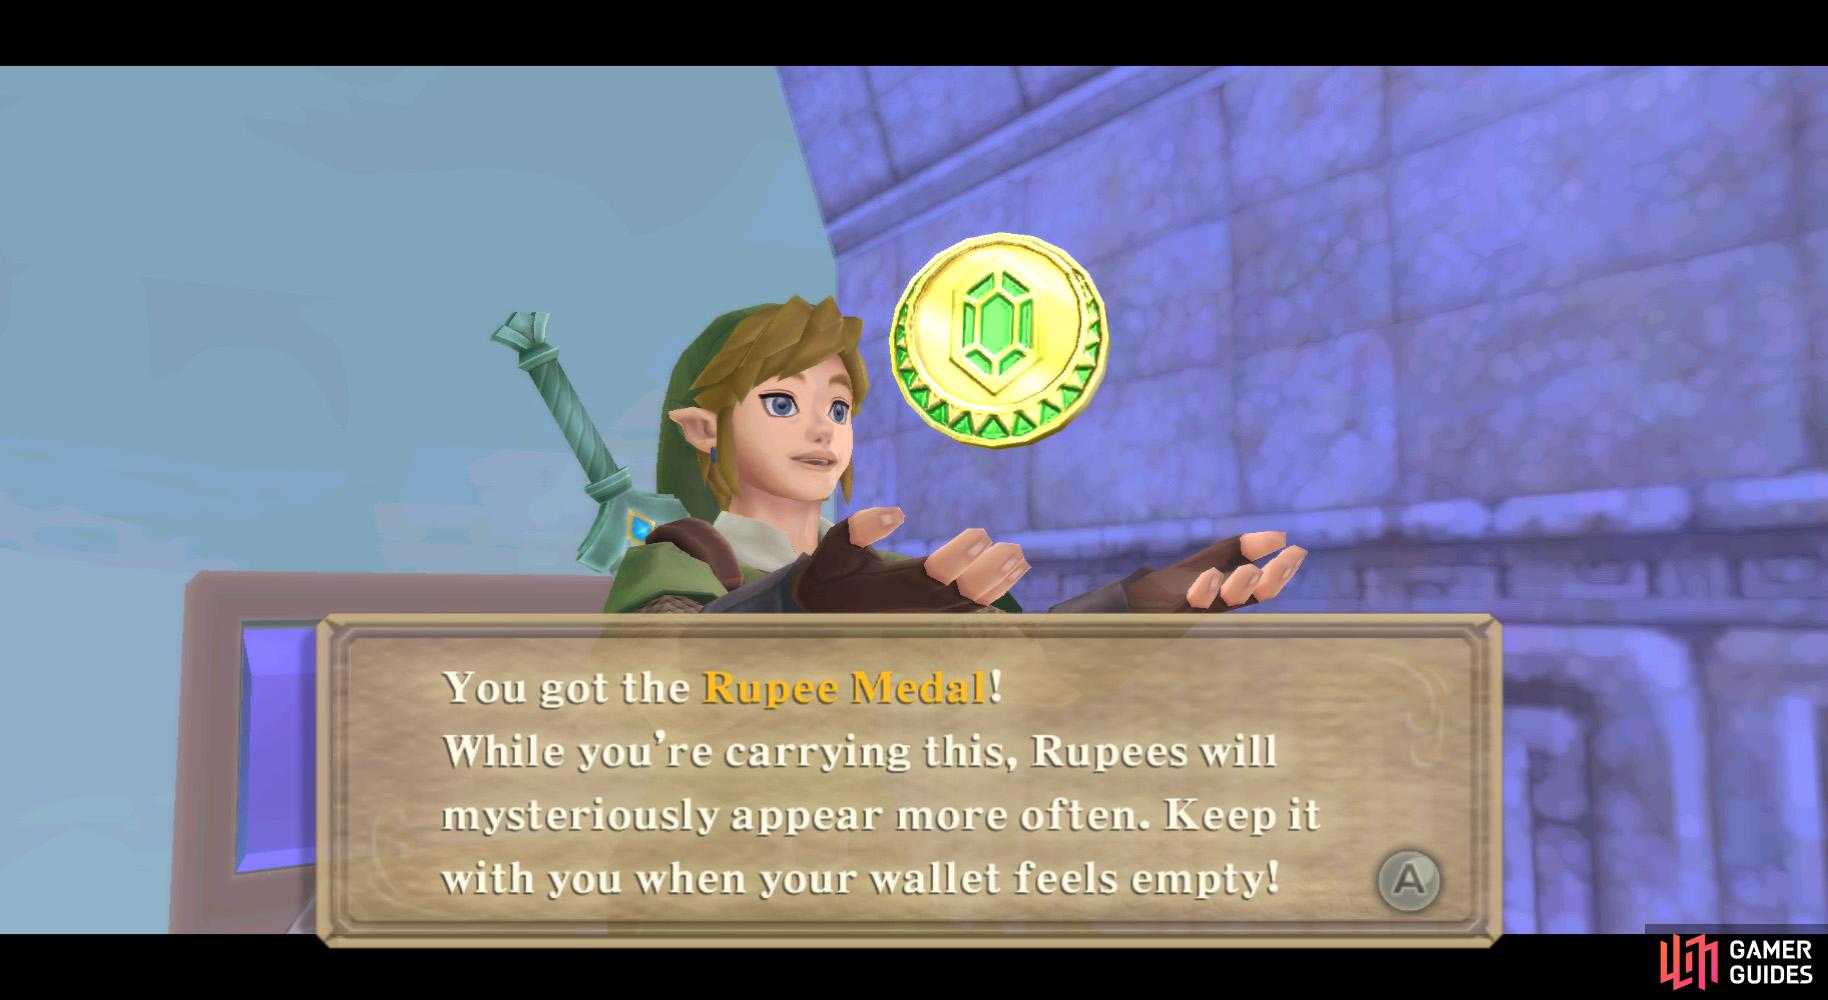 Carry this to find more rupees while adventuring.